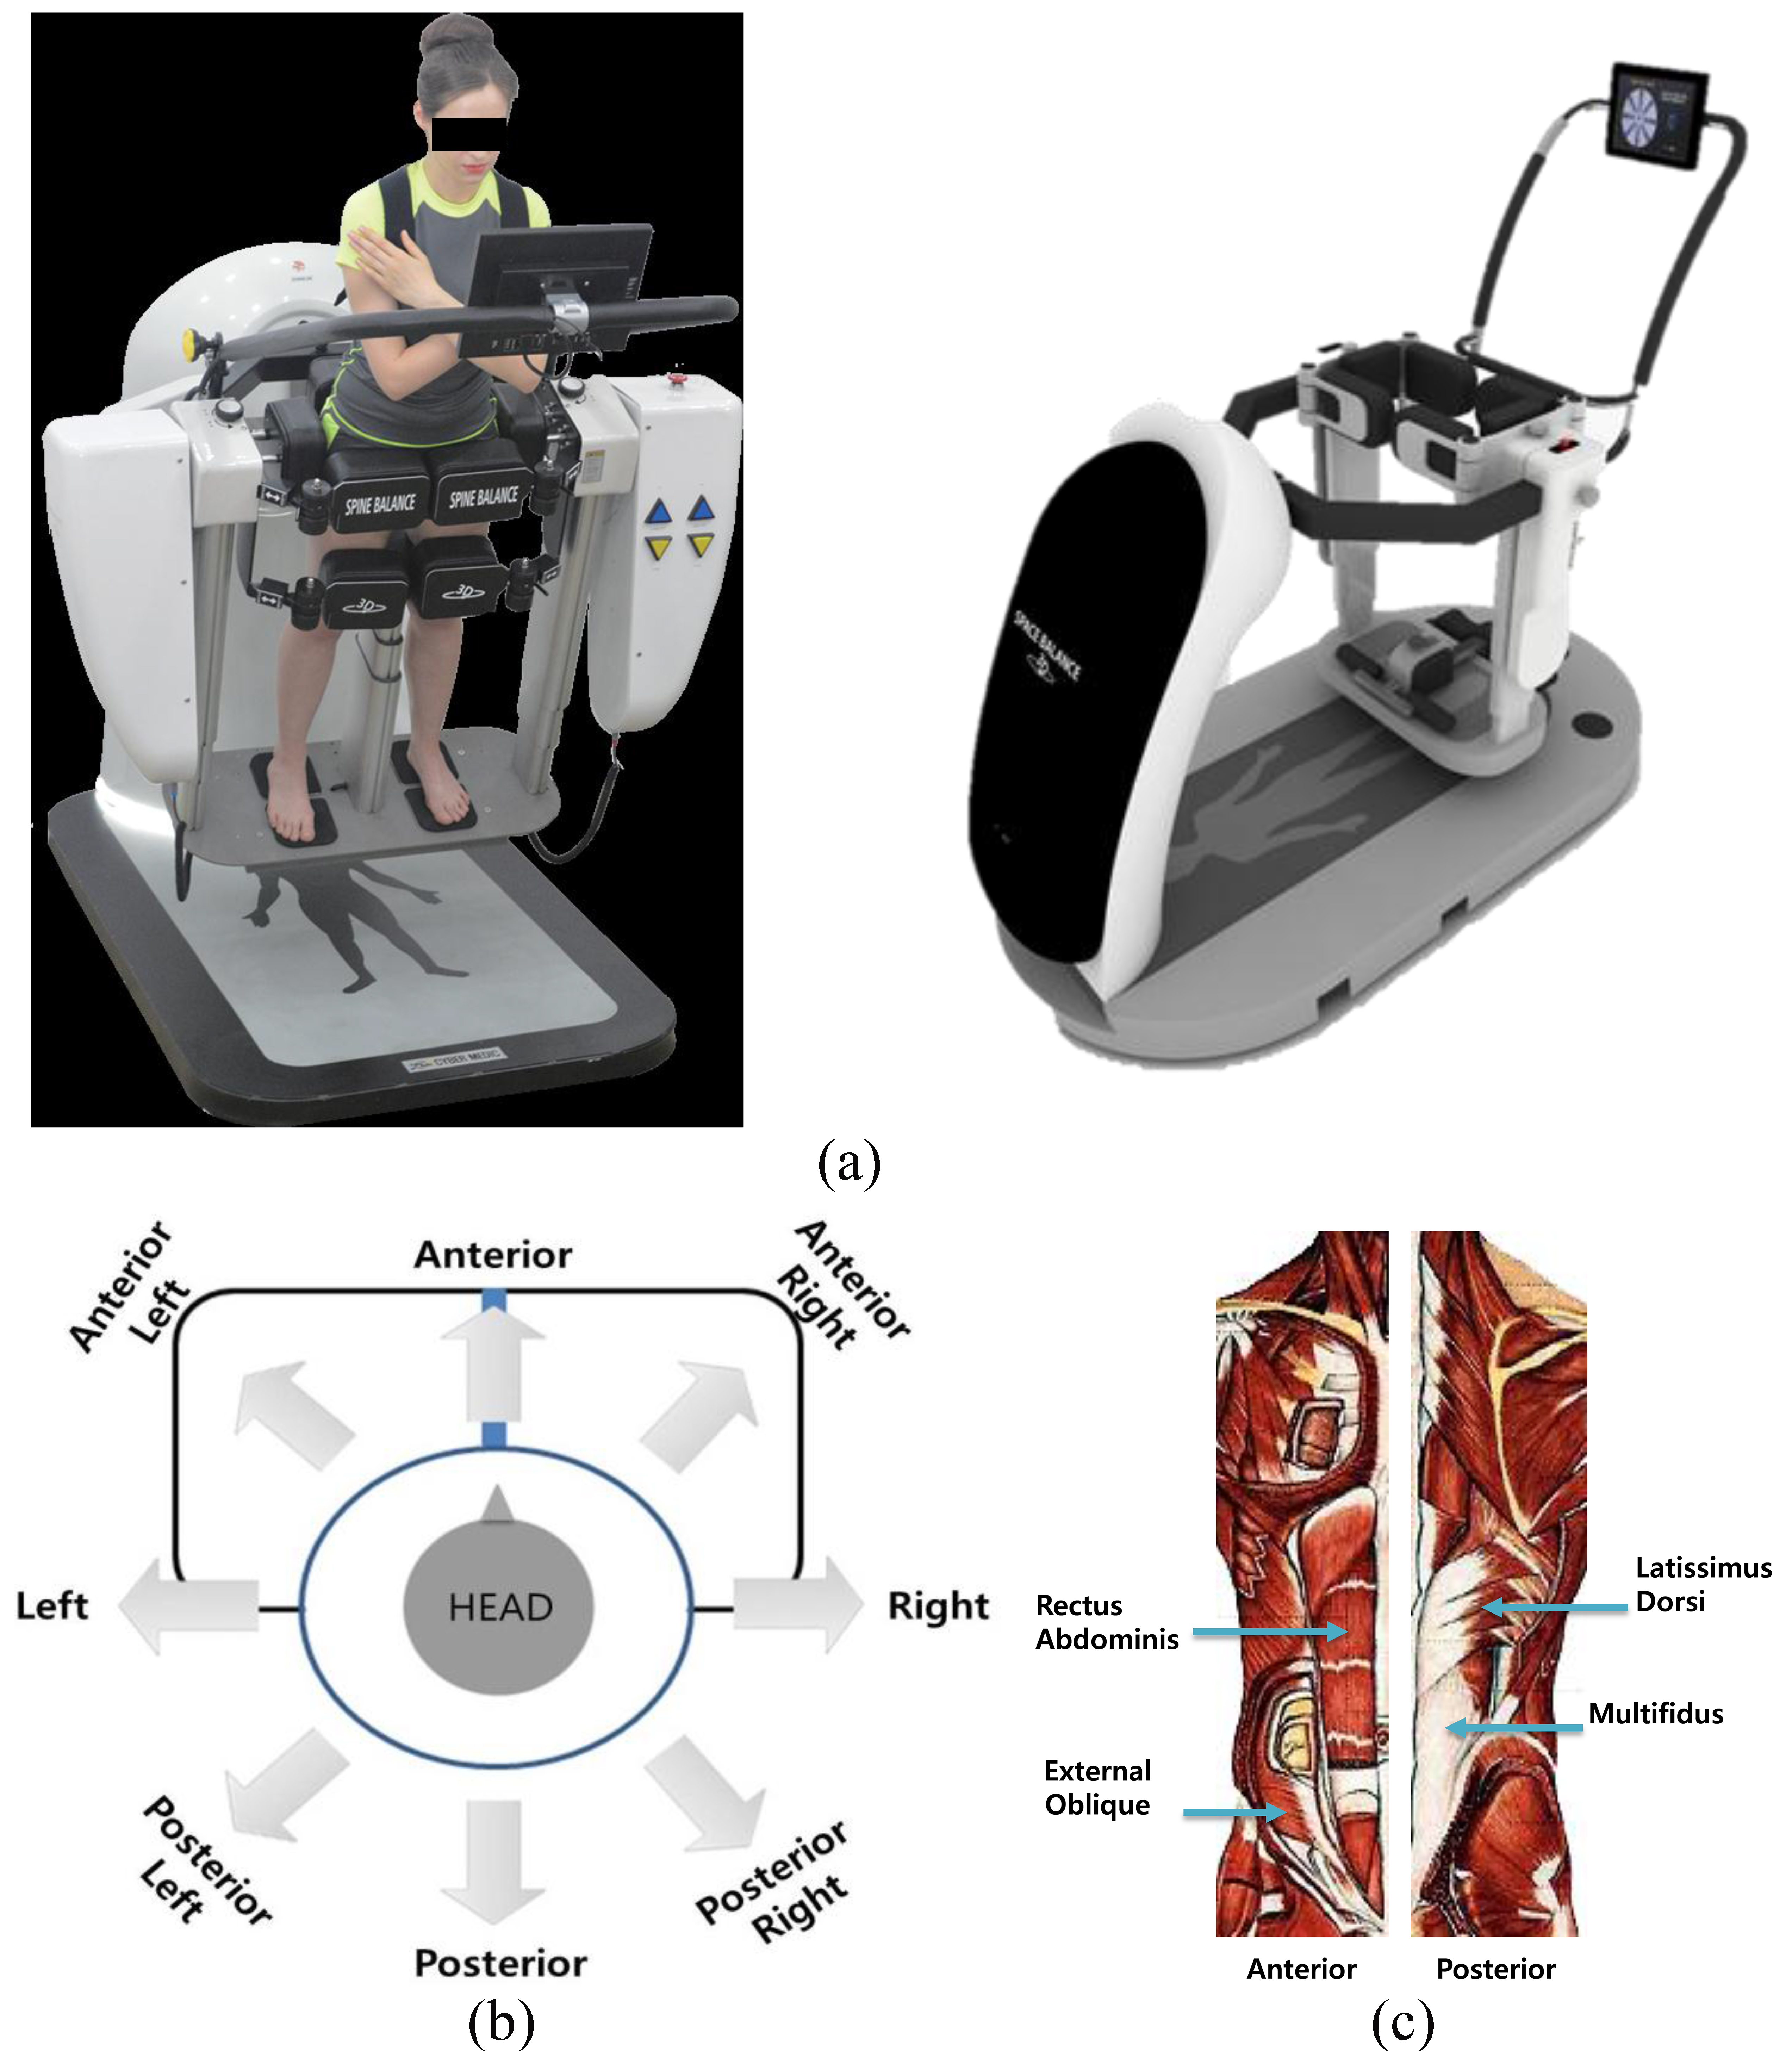 (a) 3D dynamic exercise device we developed (Spine Balance 3D, CyberMedic Co. and Chonbuk National University, Korea), (b) Explanation of the eight tilting directions during the trunk tilt exercise modes with the device, (c) Trunk muscles measure to verify muscular activity.